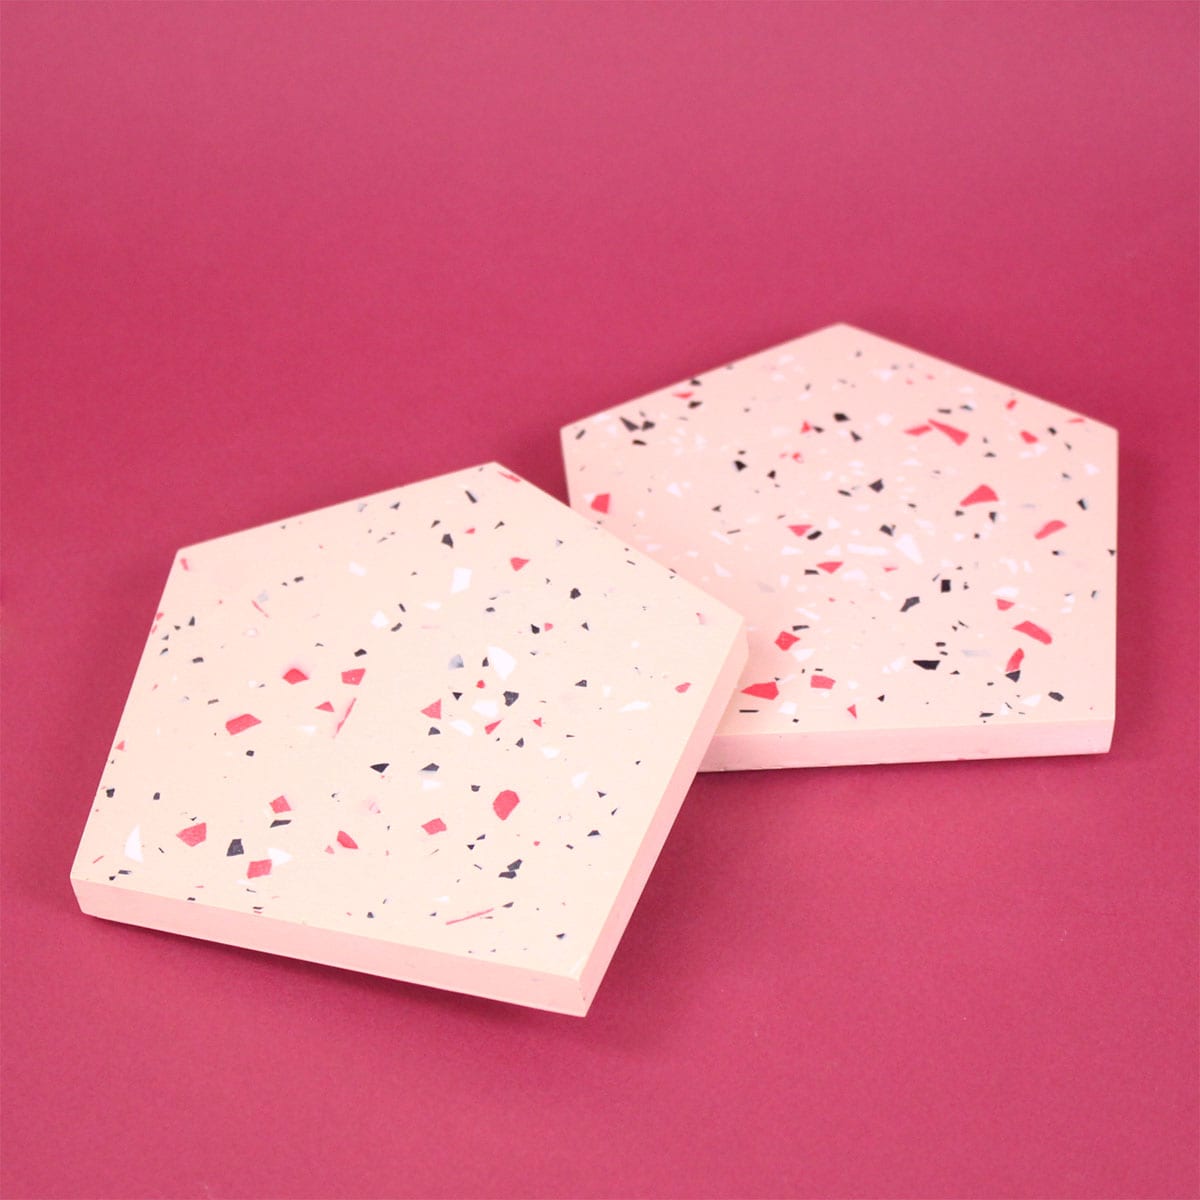 SET OF TWO FRECKLED COASTERS